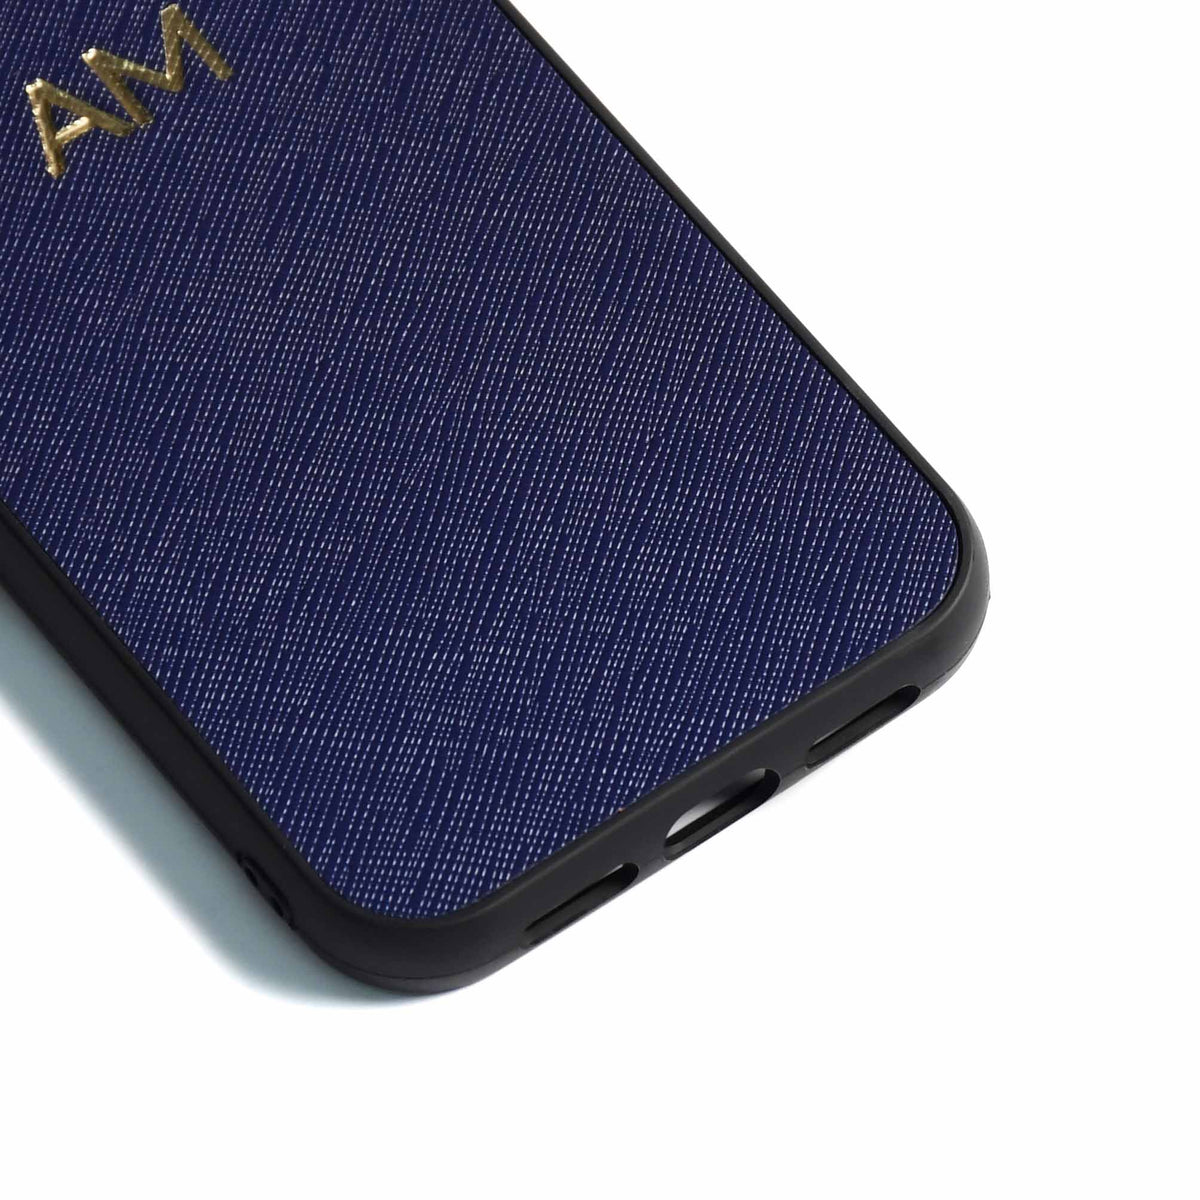 Samsung S21 - Navy Blue - Personalizable